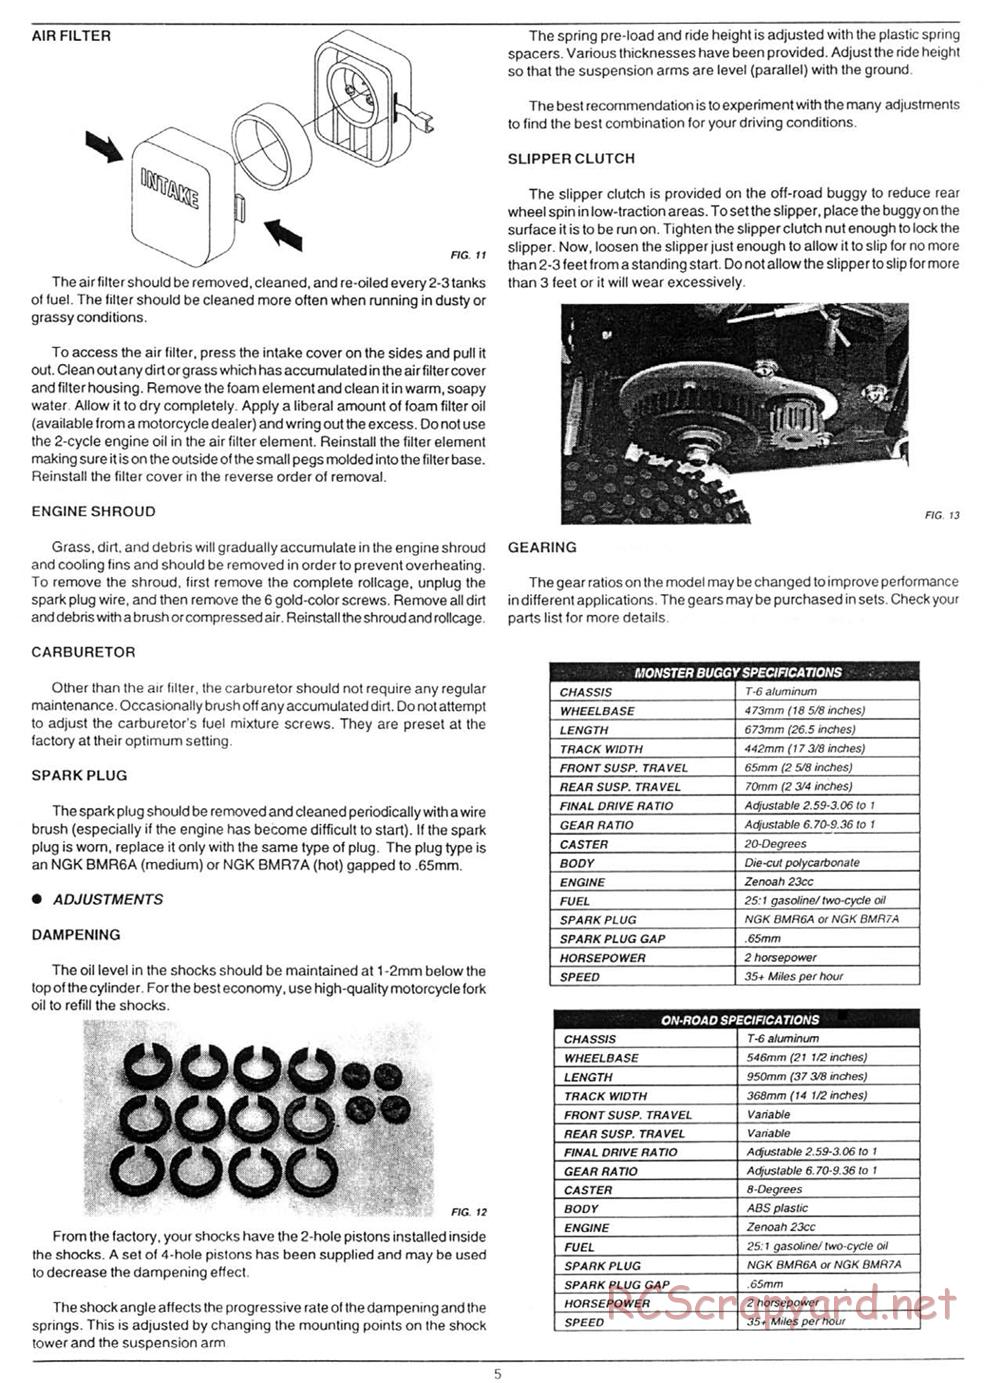 Traxxas - Monster Buggy (Gas Buggy) (1993) - Manual - Page 5